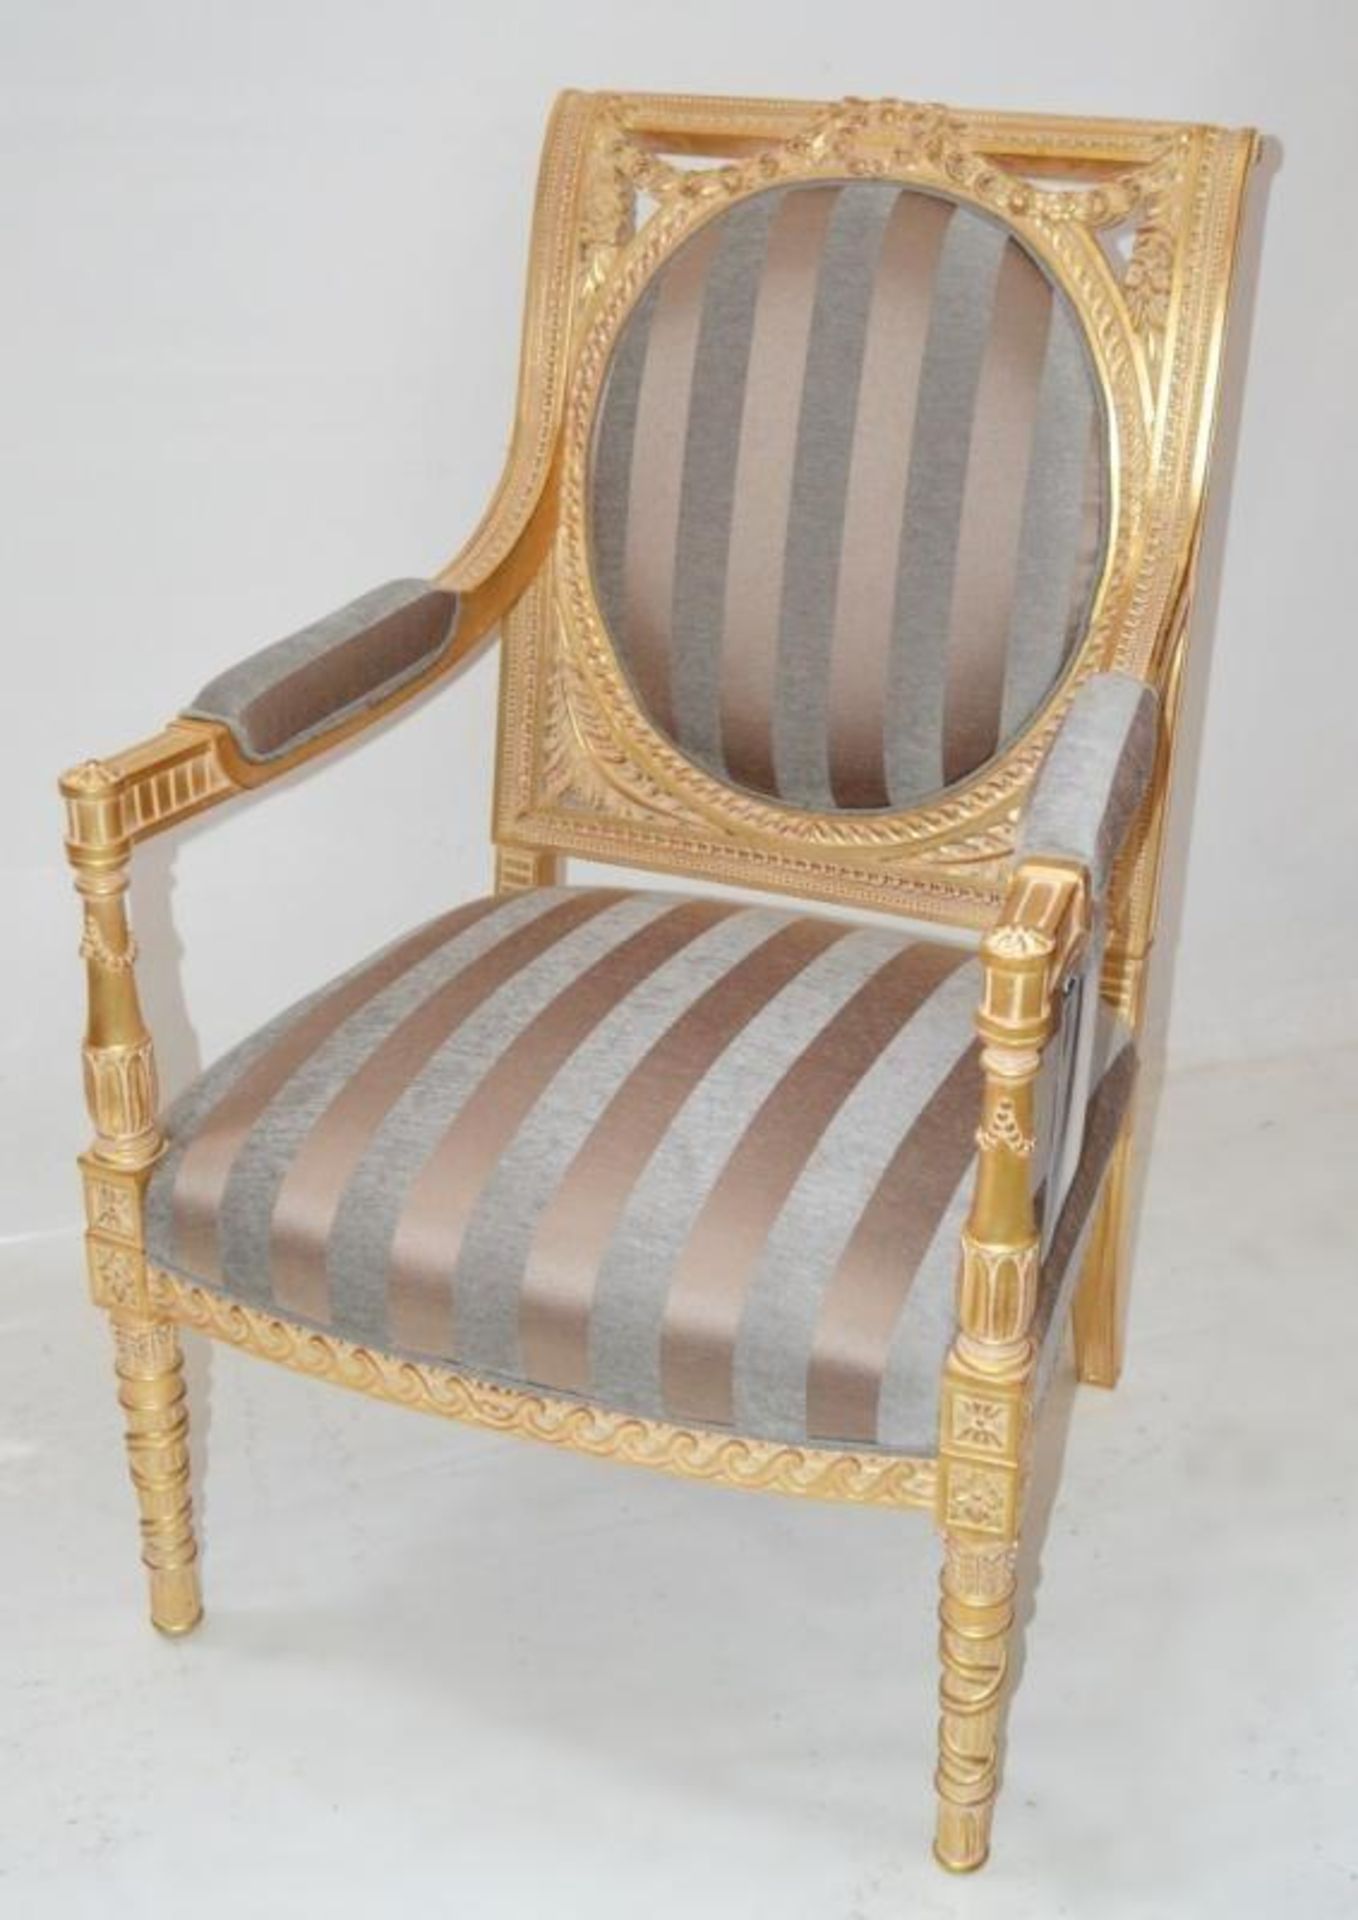 1 x DURESTA Flavia Chair - Features A Hand-Carved Hard Wood Frame With Hand-Stitched Coil Sprung Sea - Image 4 of 16